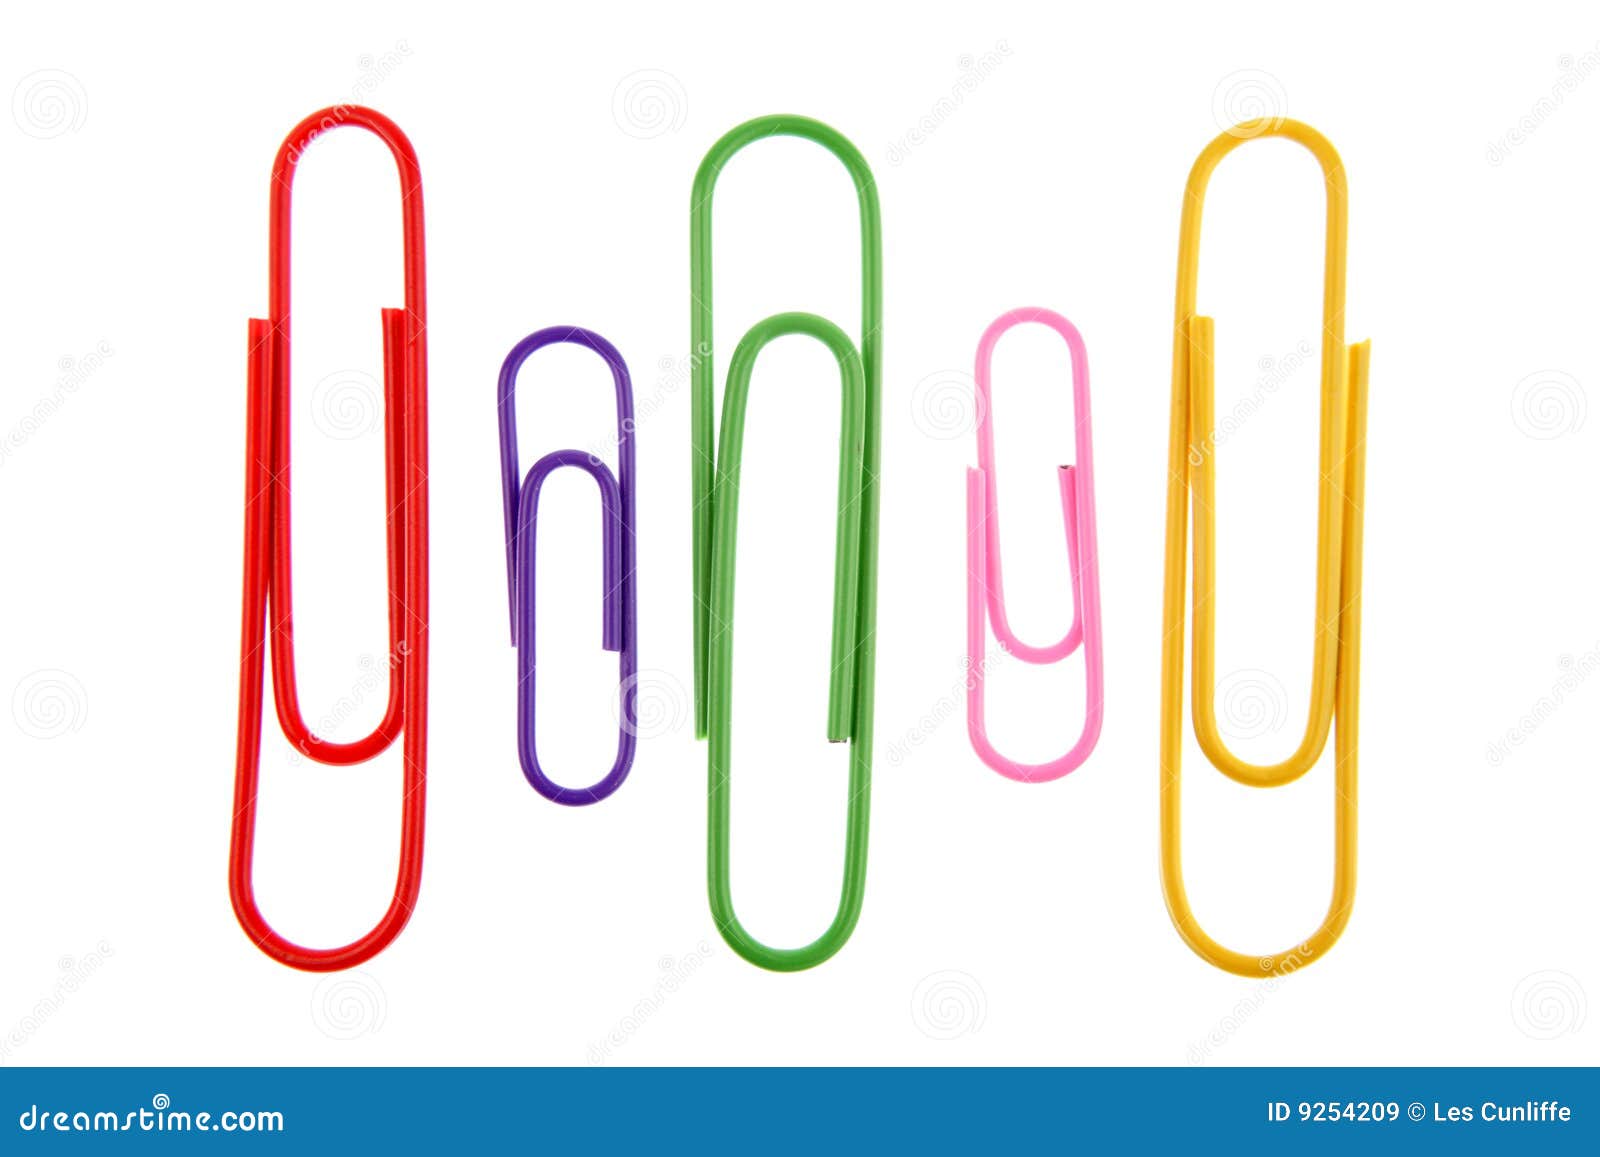 five paper-clips